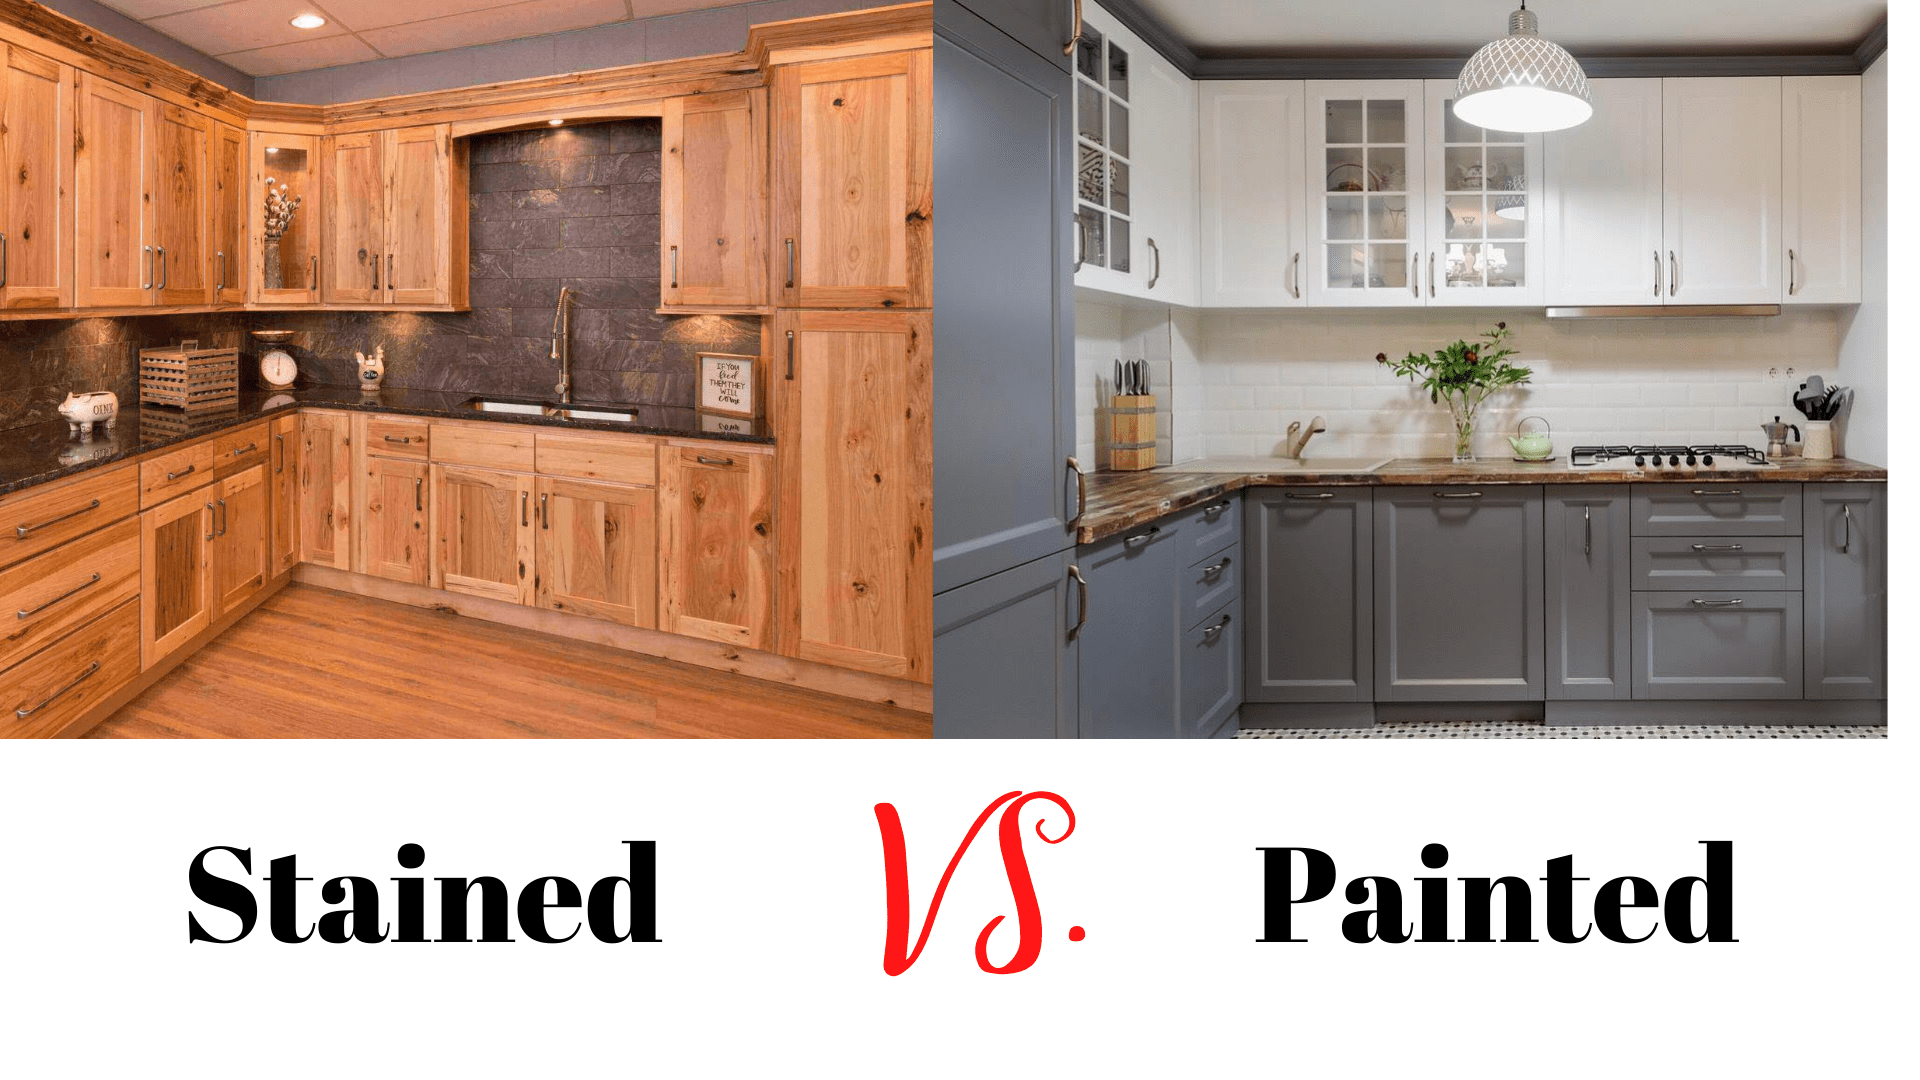 Painted Vs Stained Kitchen Cabinets - Pros Cons - 55 Housing Options